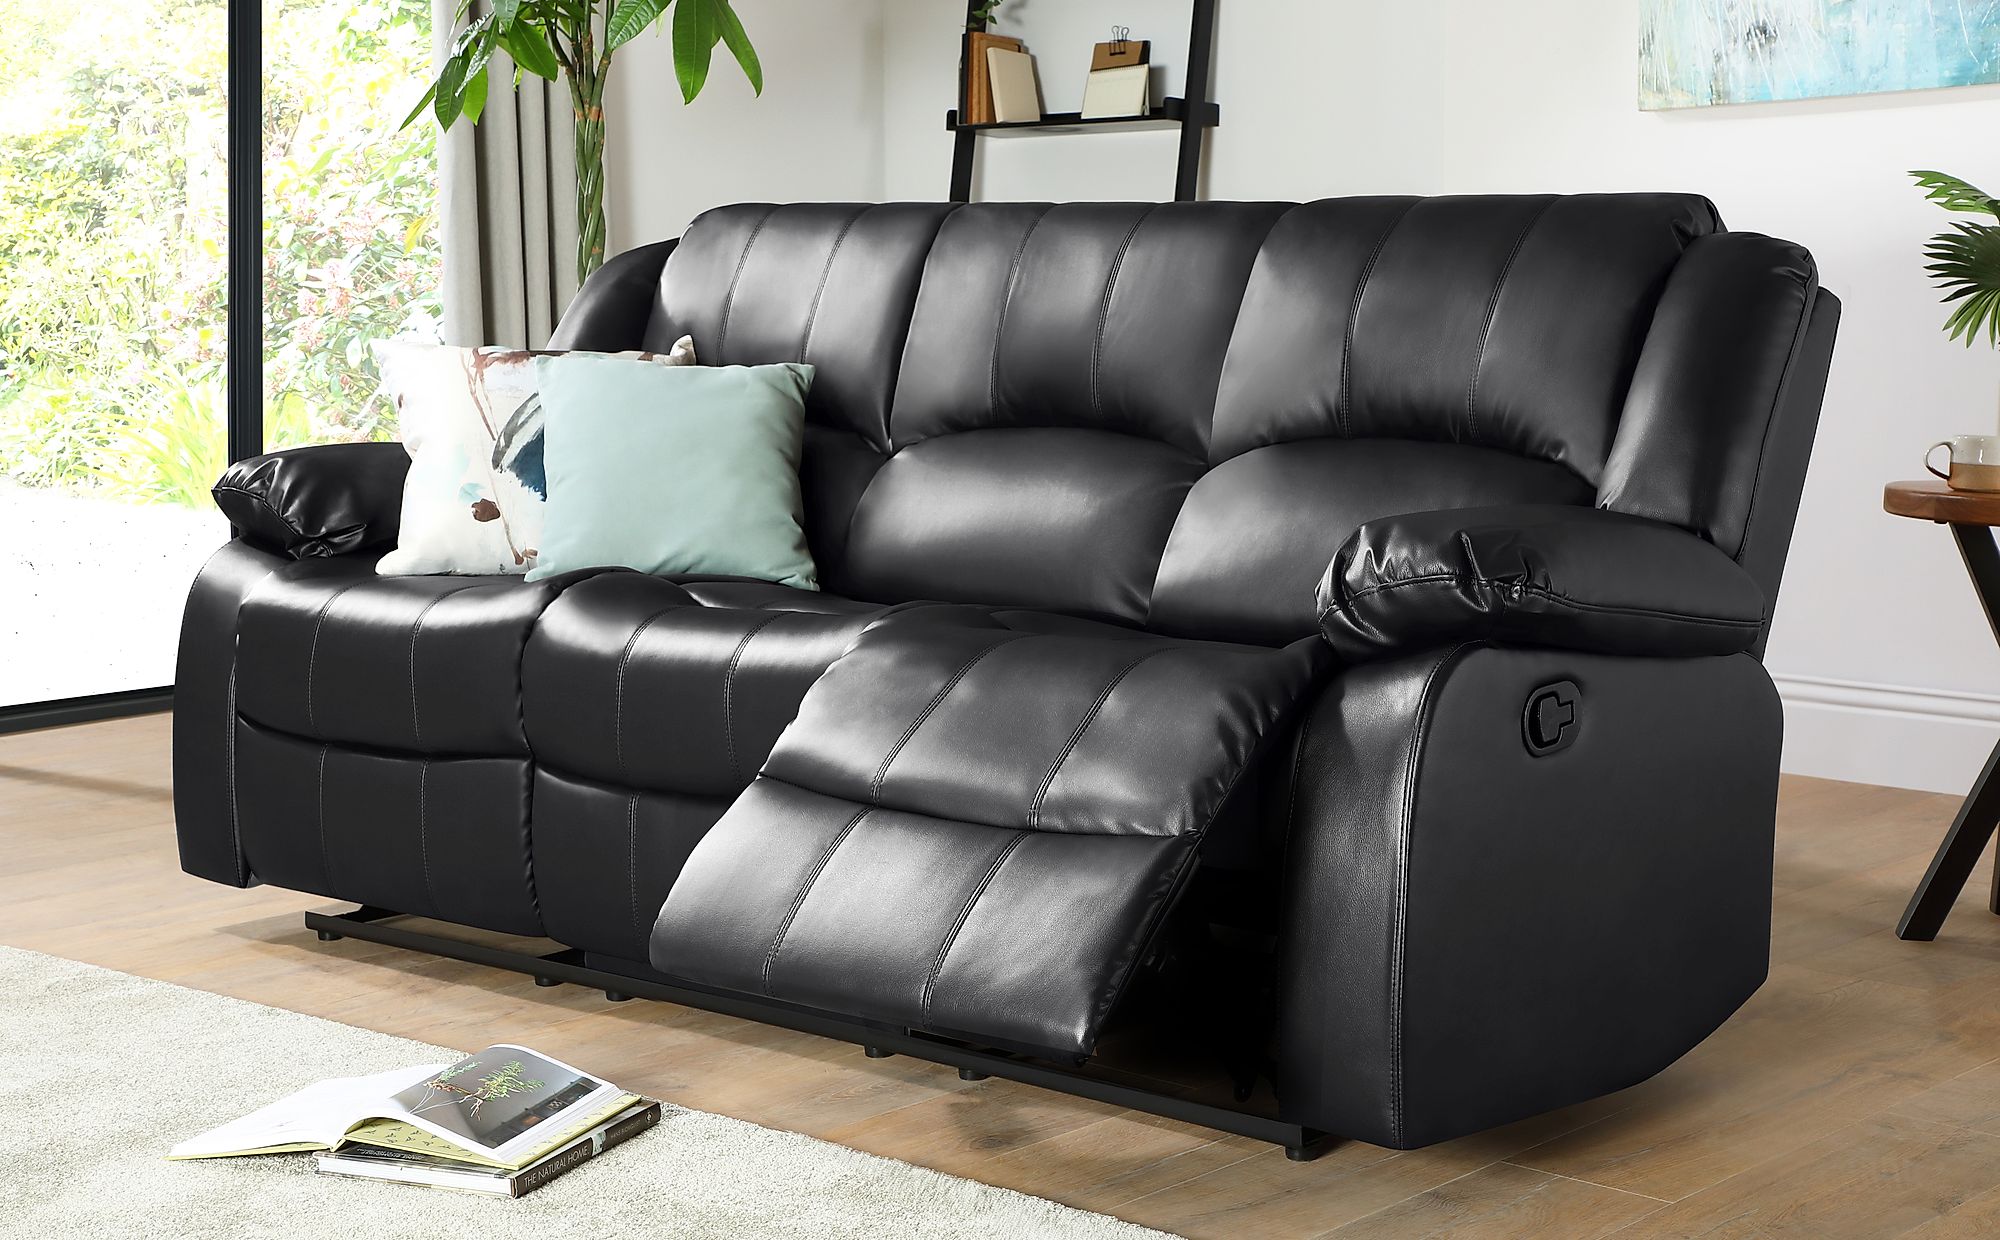 soft leather recliner sofa